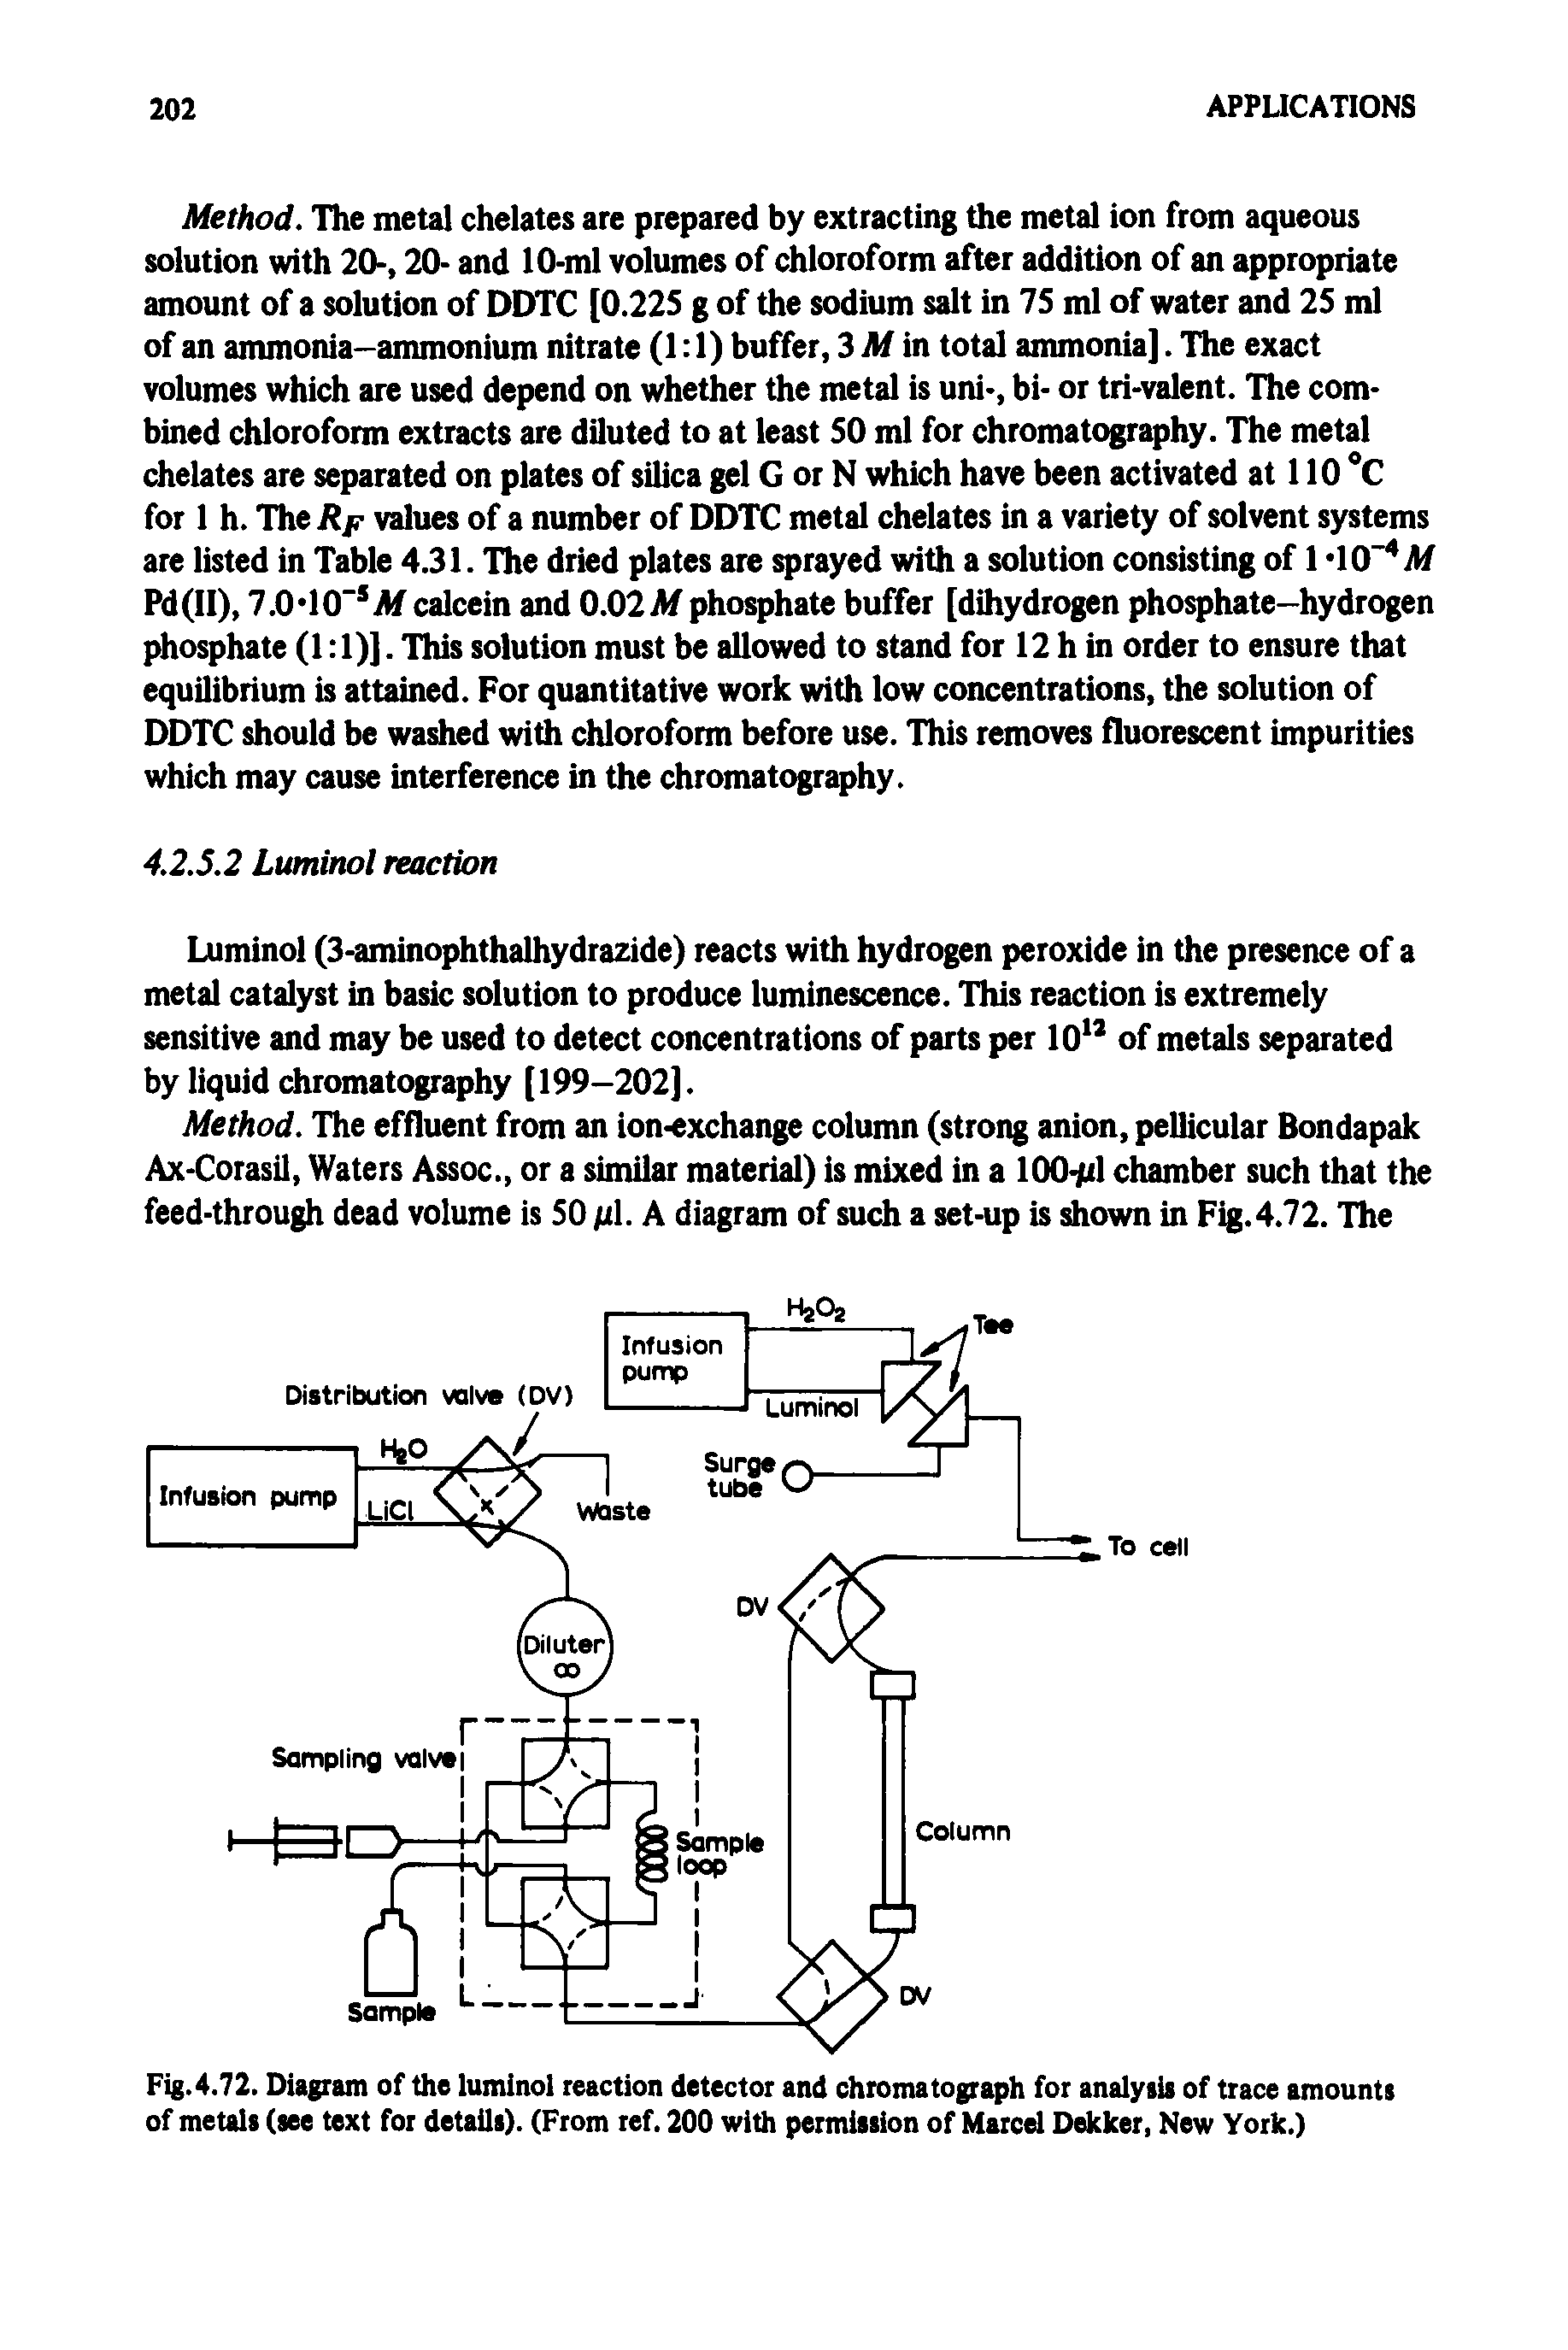 Fig.4.72. Diagram of the luminol reaction detector and chromatograph for analysis of trace amounts of metals (see text for details). (From ref. 200 with permission of Marcel Dekker, New York.)...